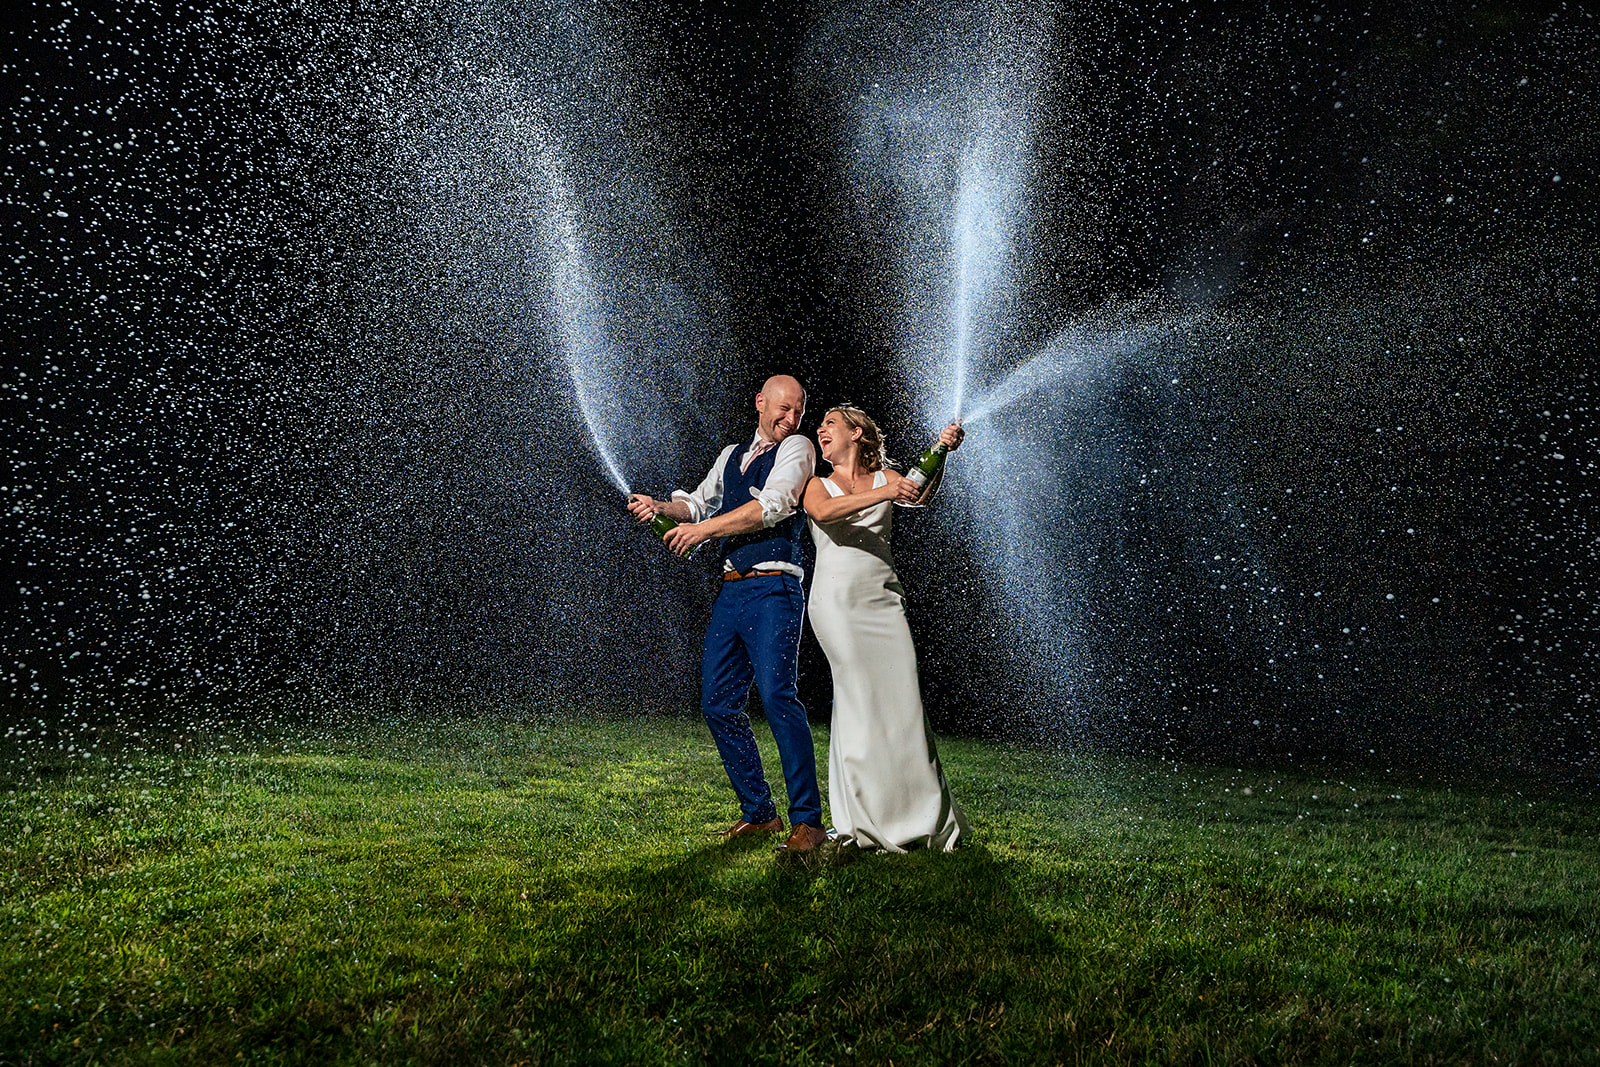 bride and groom champagne spray photo at vermont wedding